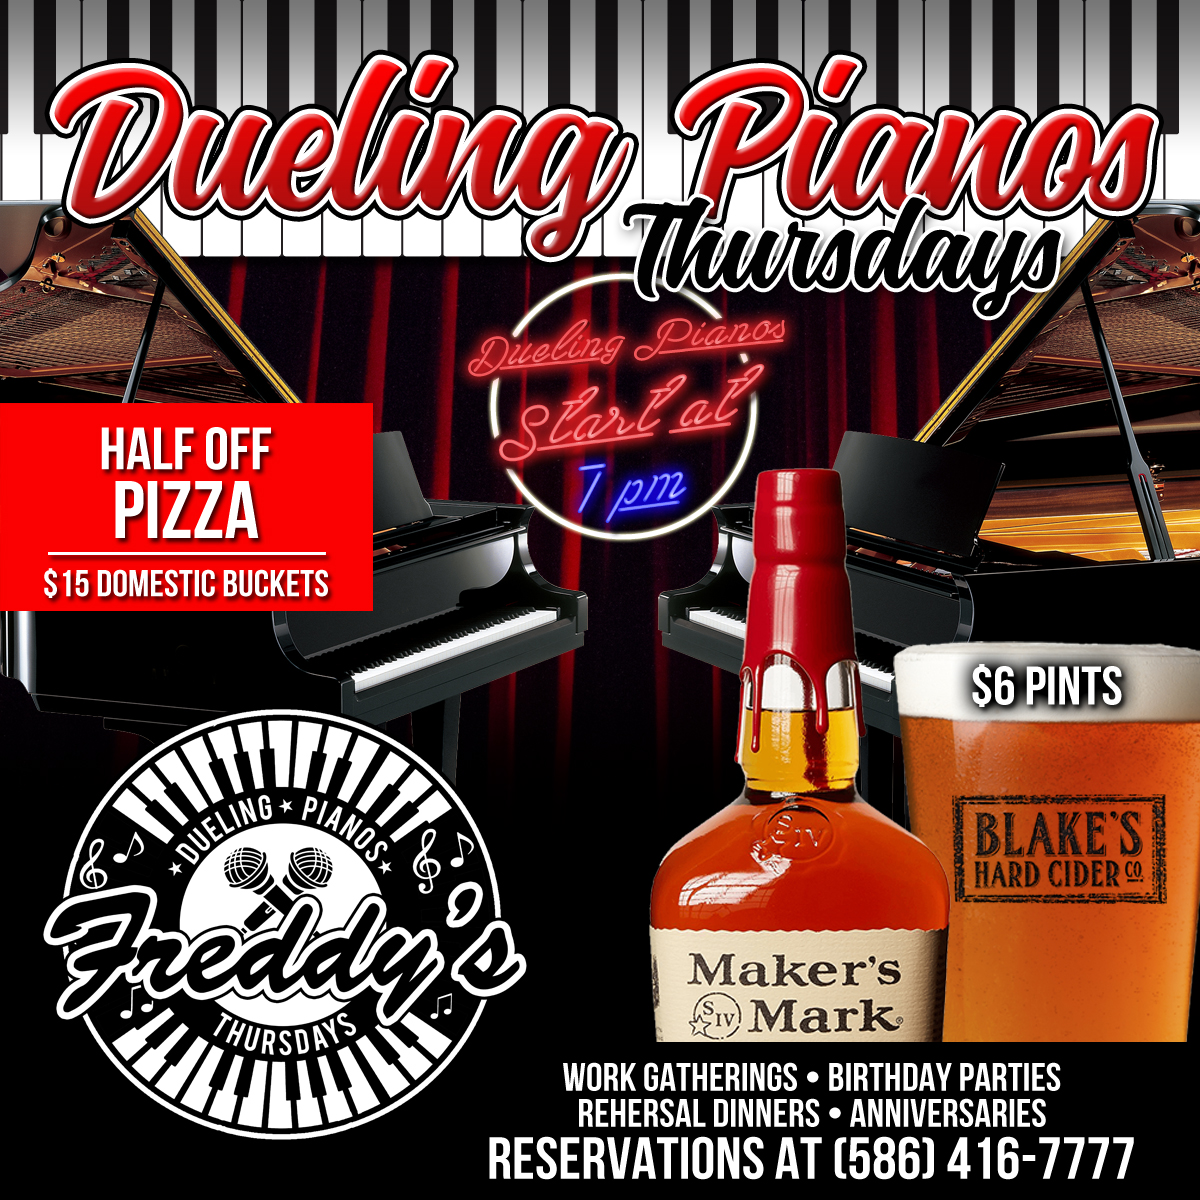 Thursday Dueling Pianos